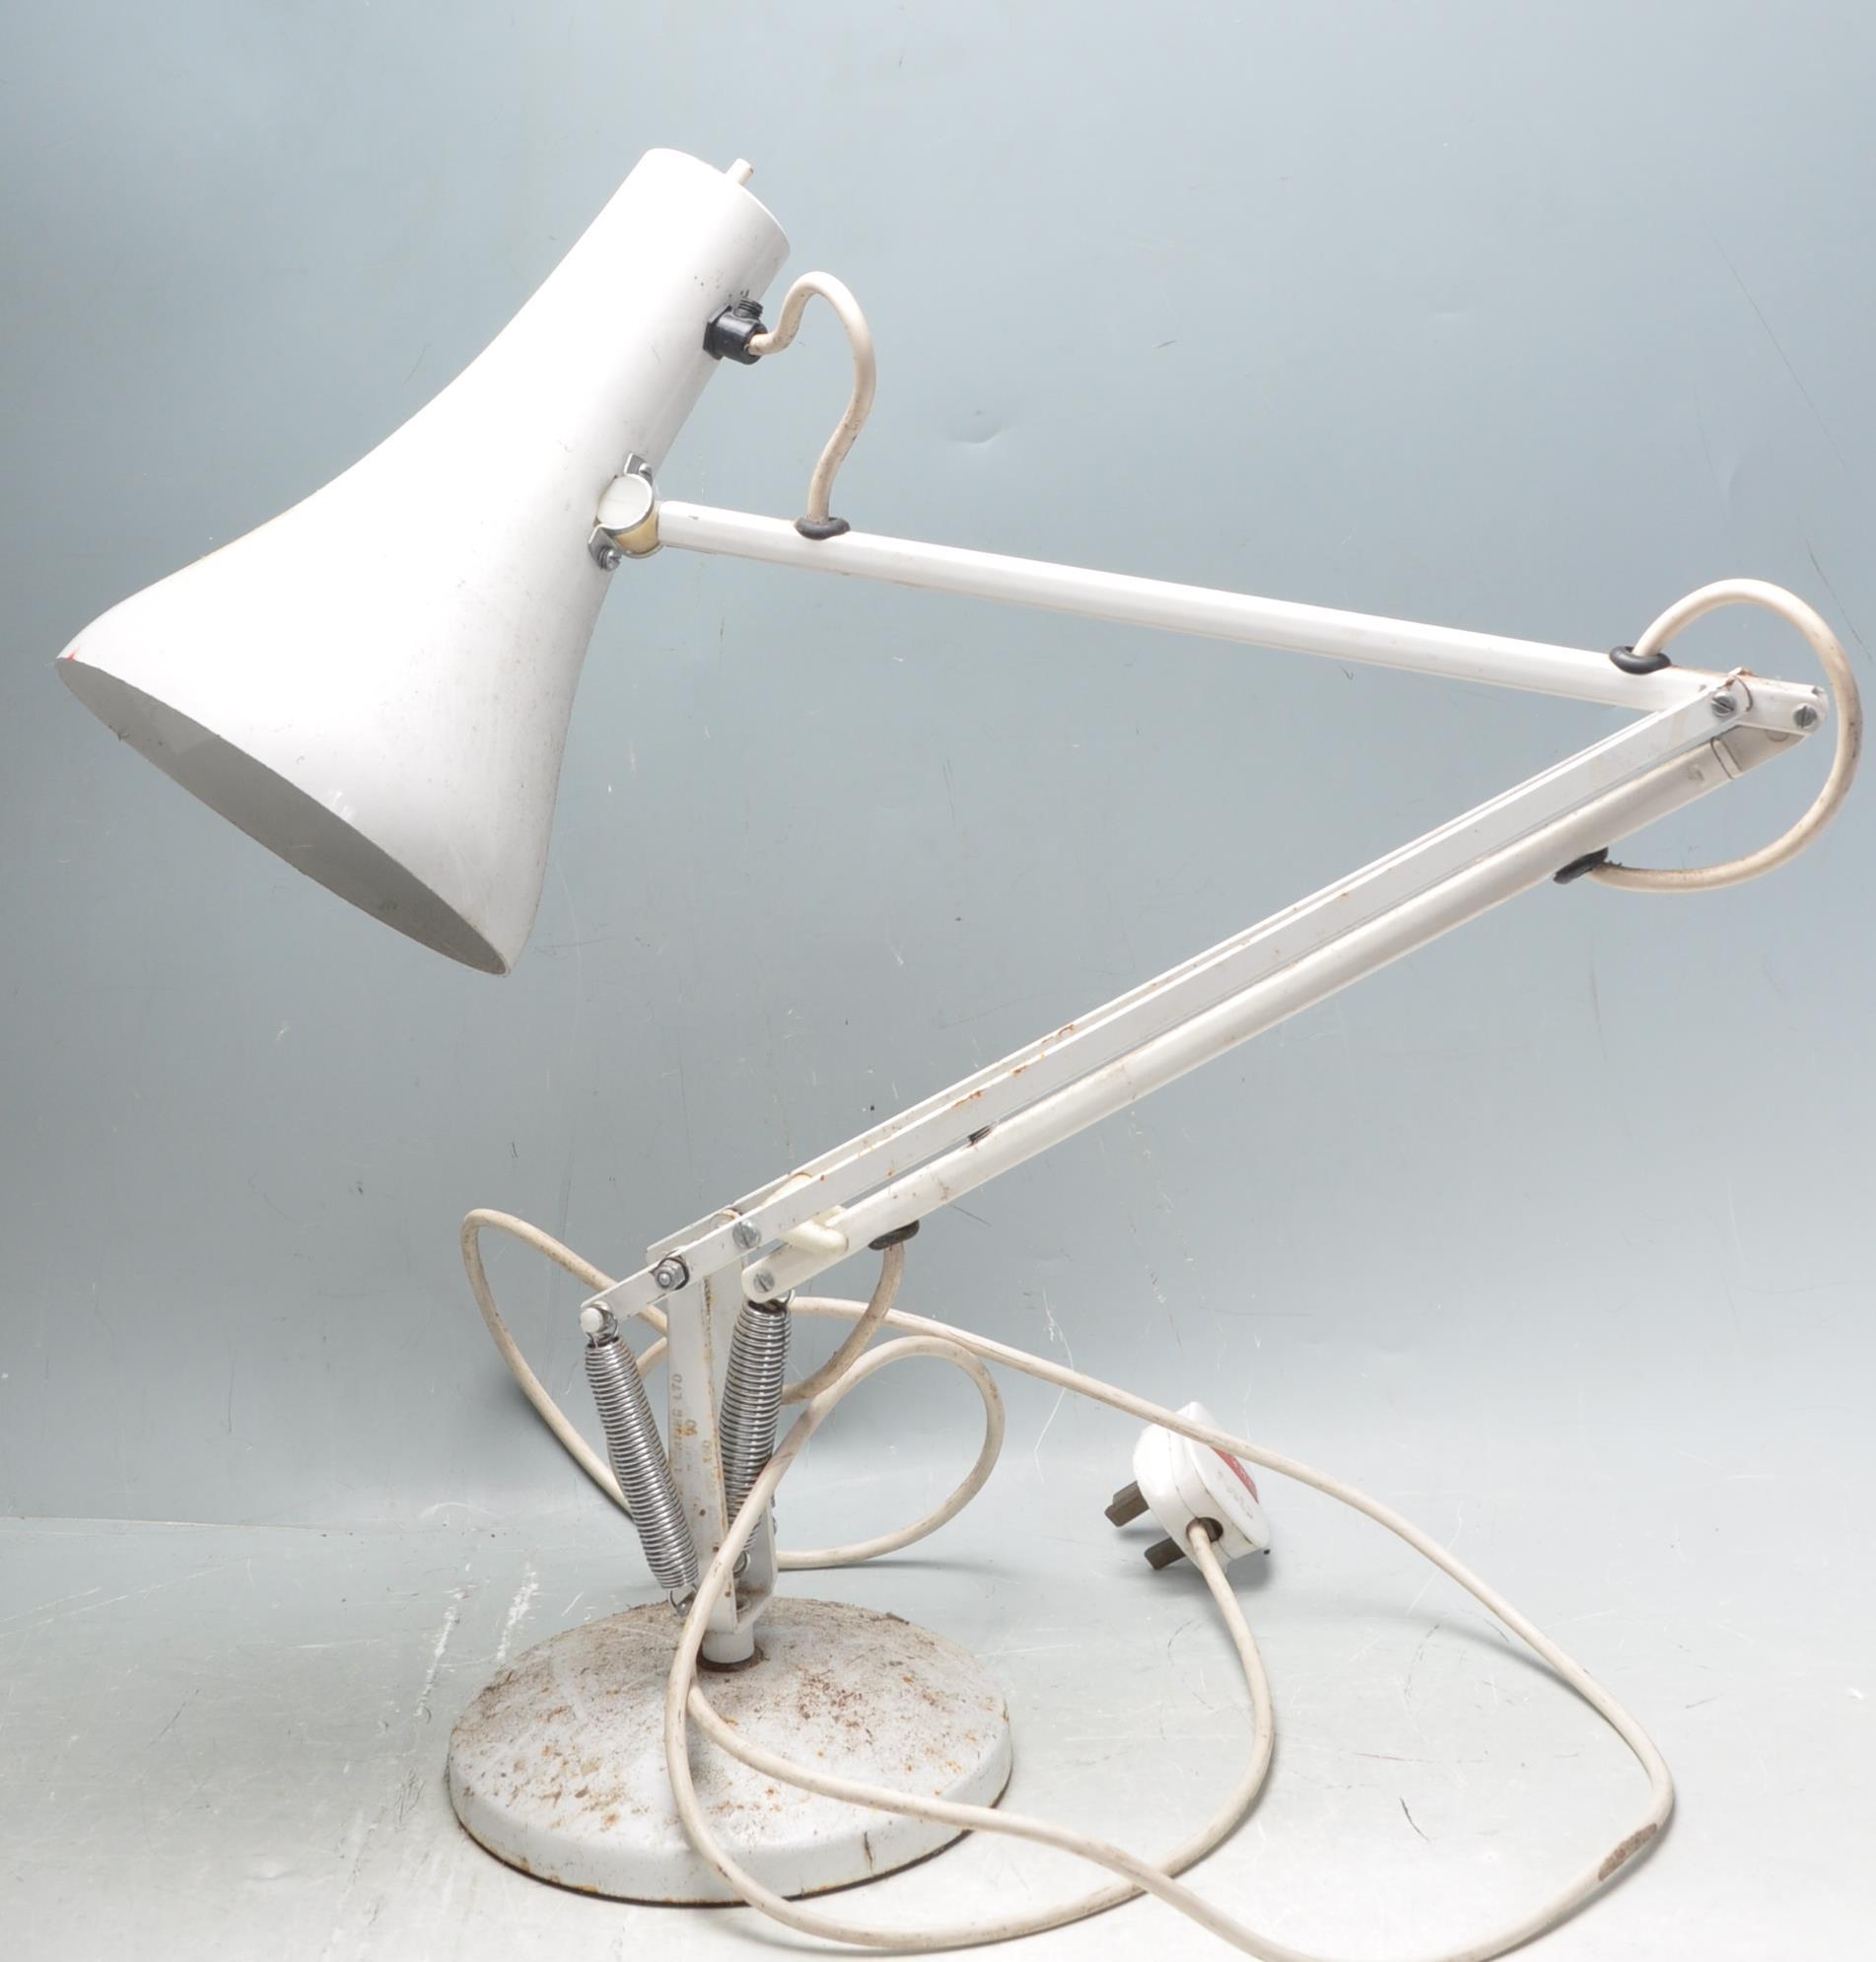 RETRO VINTAGE INDUSTRIAL 20TH CENTURY HERBERT TERRY ANGLEPOISE LAMP - Image 2 of 5